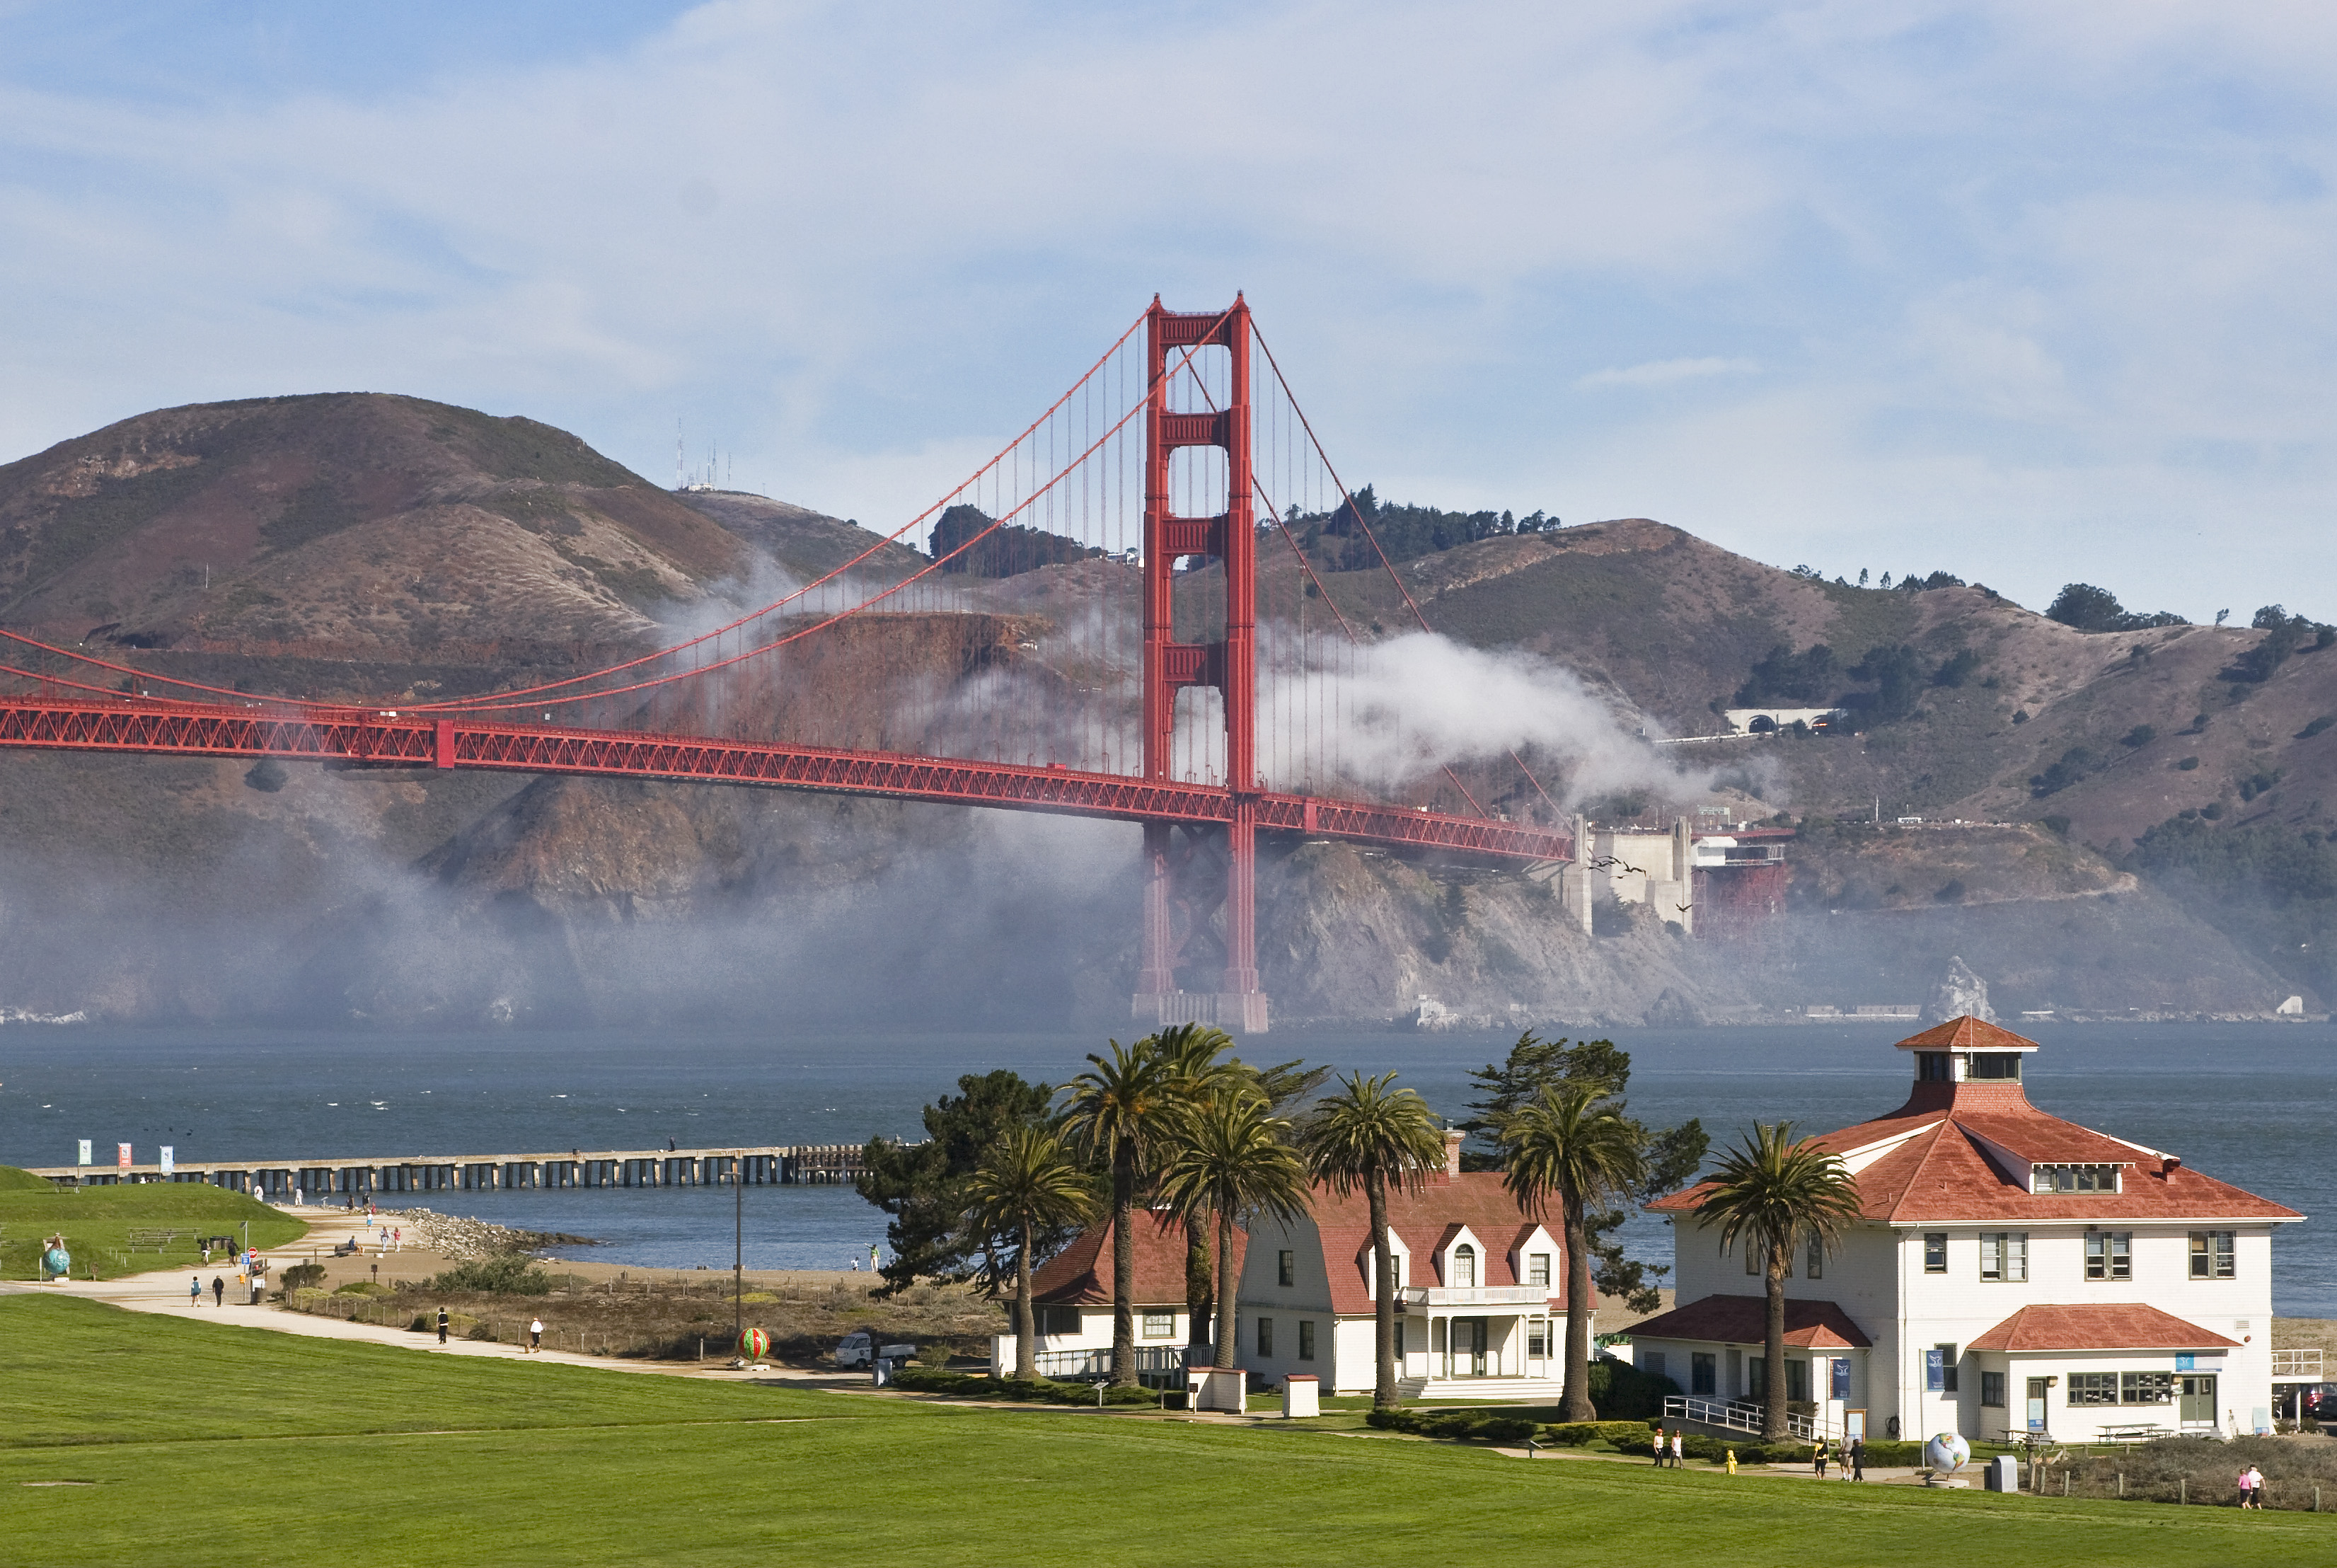 White building with red roofs on Crissy Field with blue bay and orange bridge with fog behind.